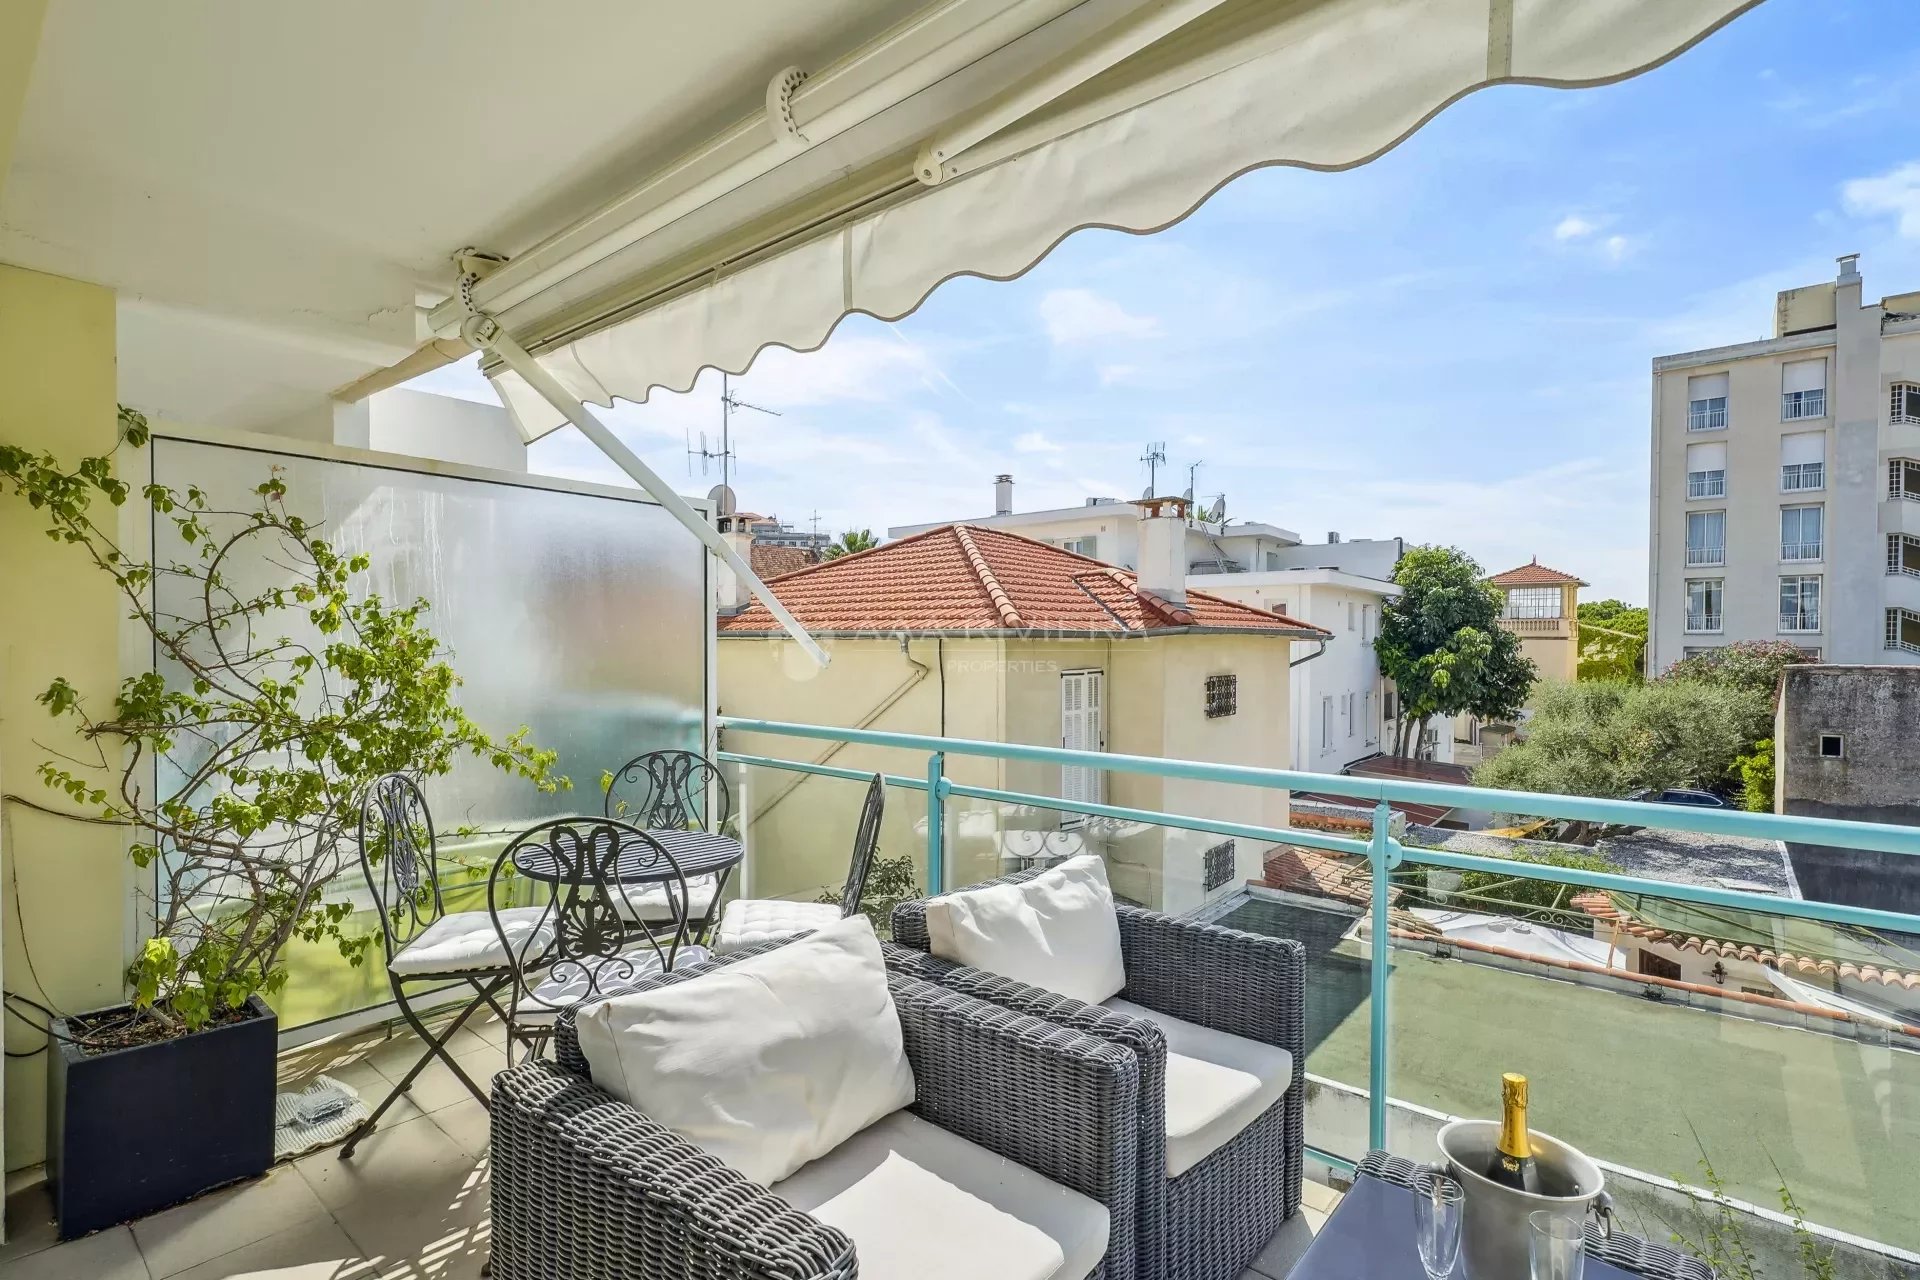 Juan-les-Pins Pinède - JOINT SOLE AGENT - Bright 2 bedroom apt with terraces and garage